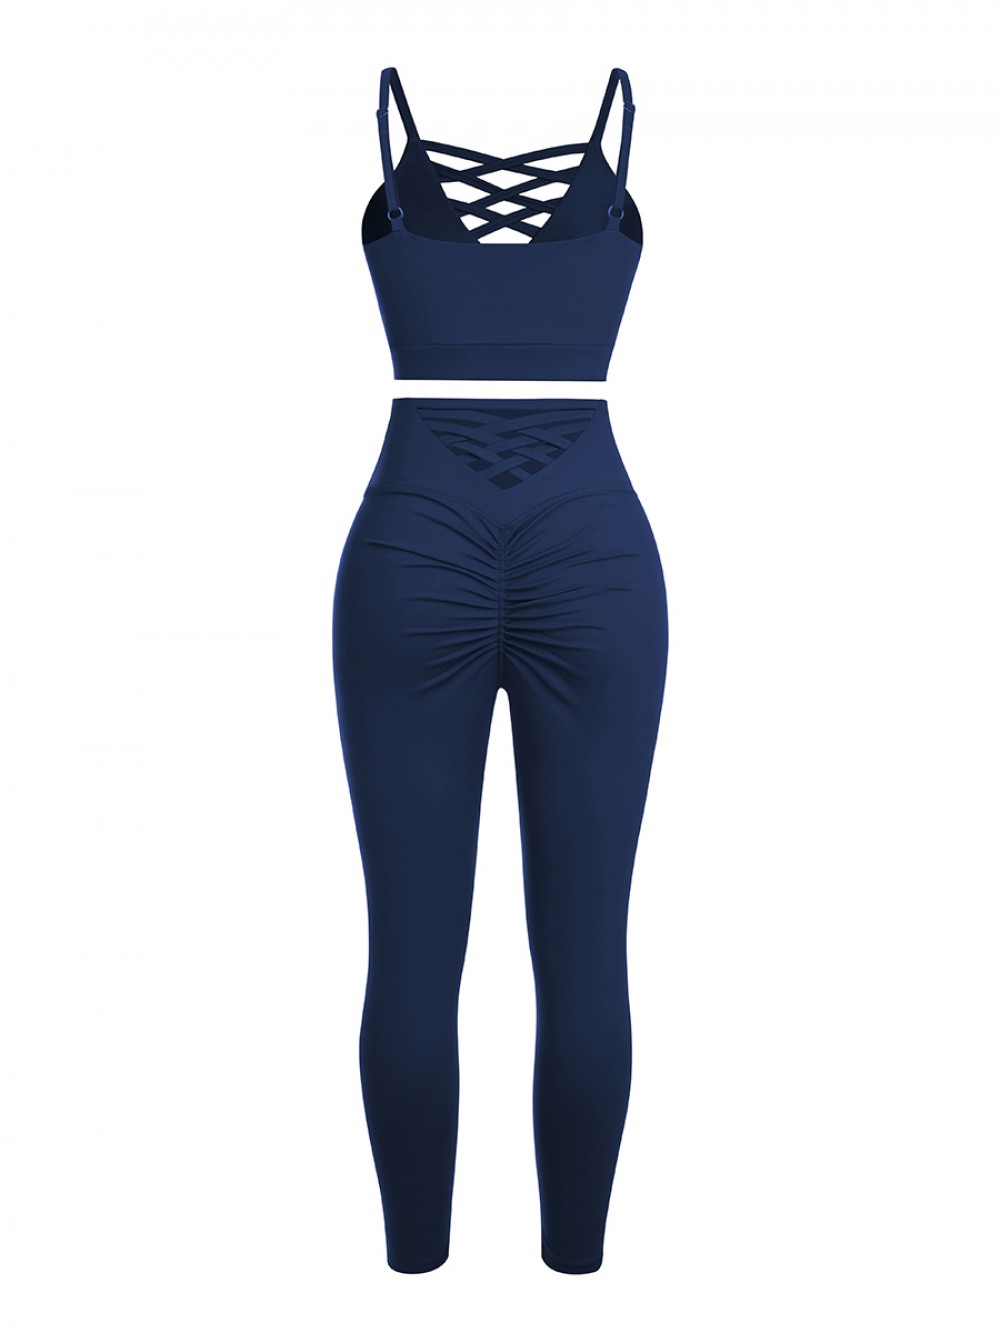 Navy Blue Lace-Up Pleated Gym Sets Full Length Delightful Garment